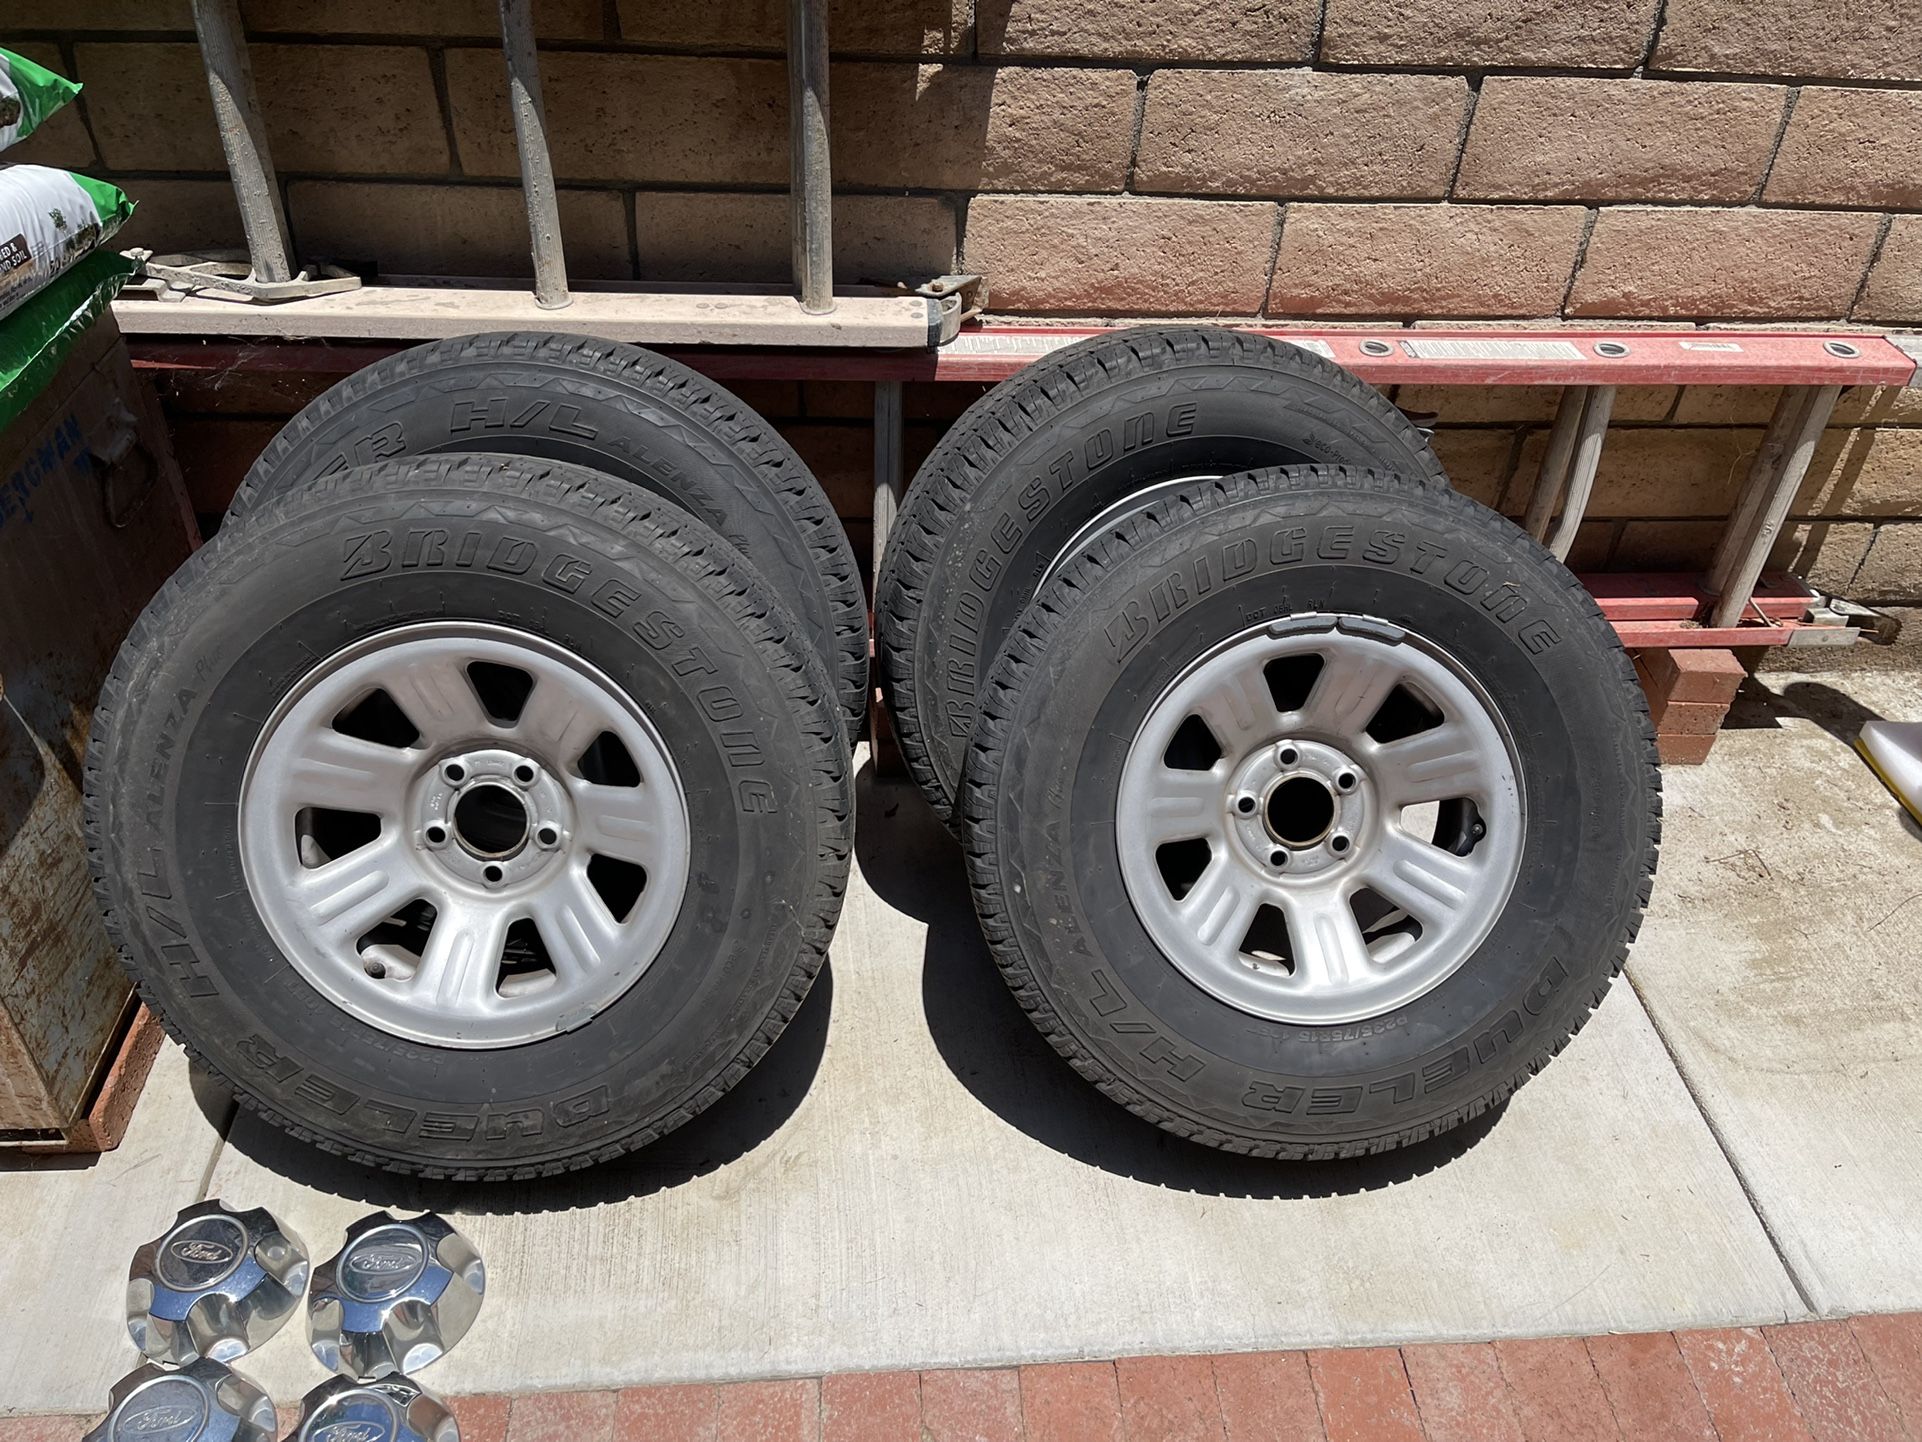 2010 Ford Ranger Wheels, Tires And Center Caps